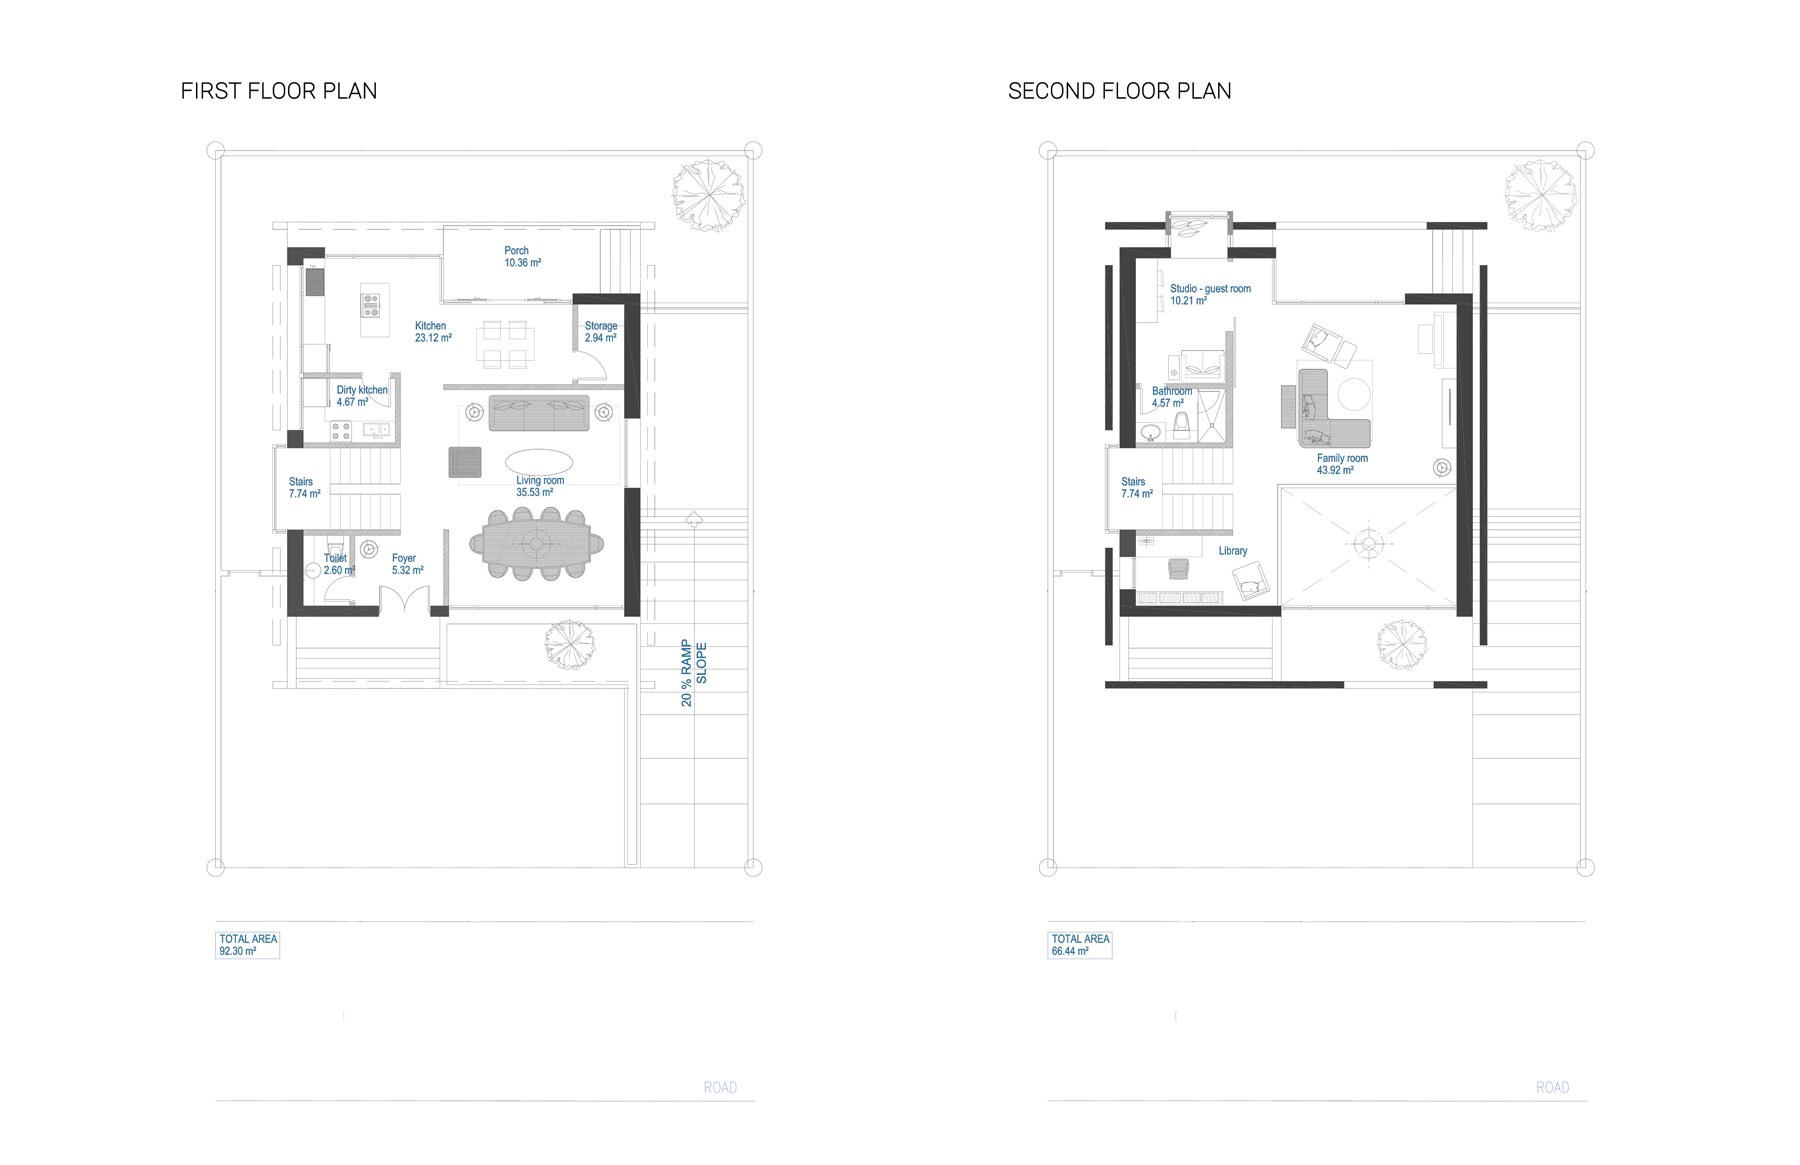 Floor Plans of the 4-Walls Residence that features a modern and minimalist style of architecture for a small family in Alabang, Manila Philippines. The house design initially takes the proportions of a cube.